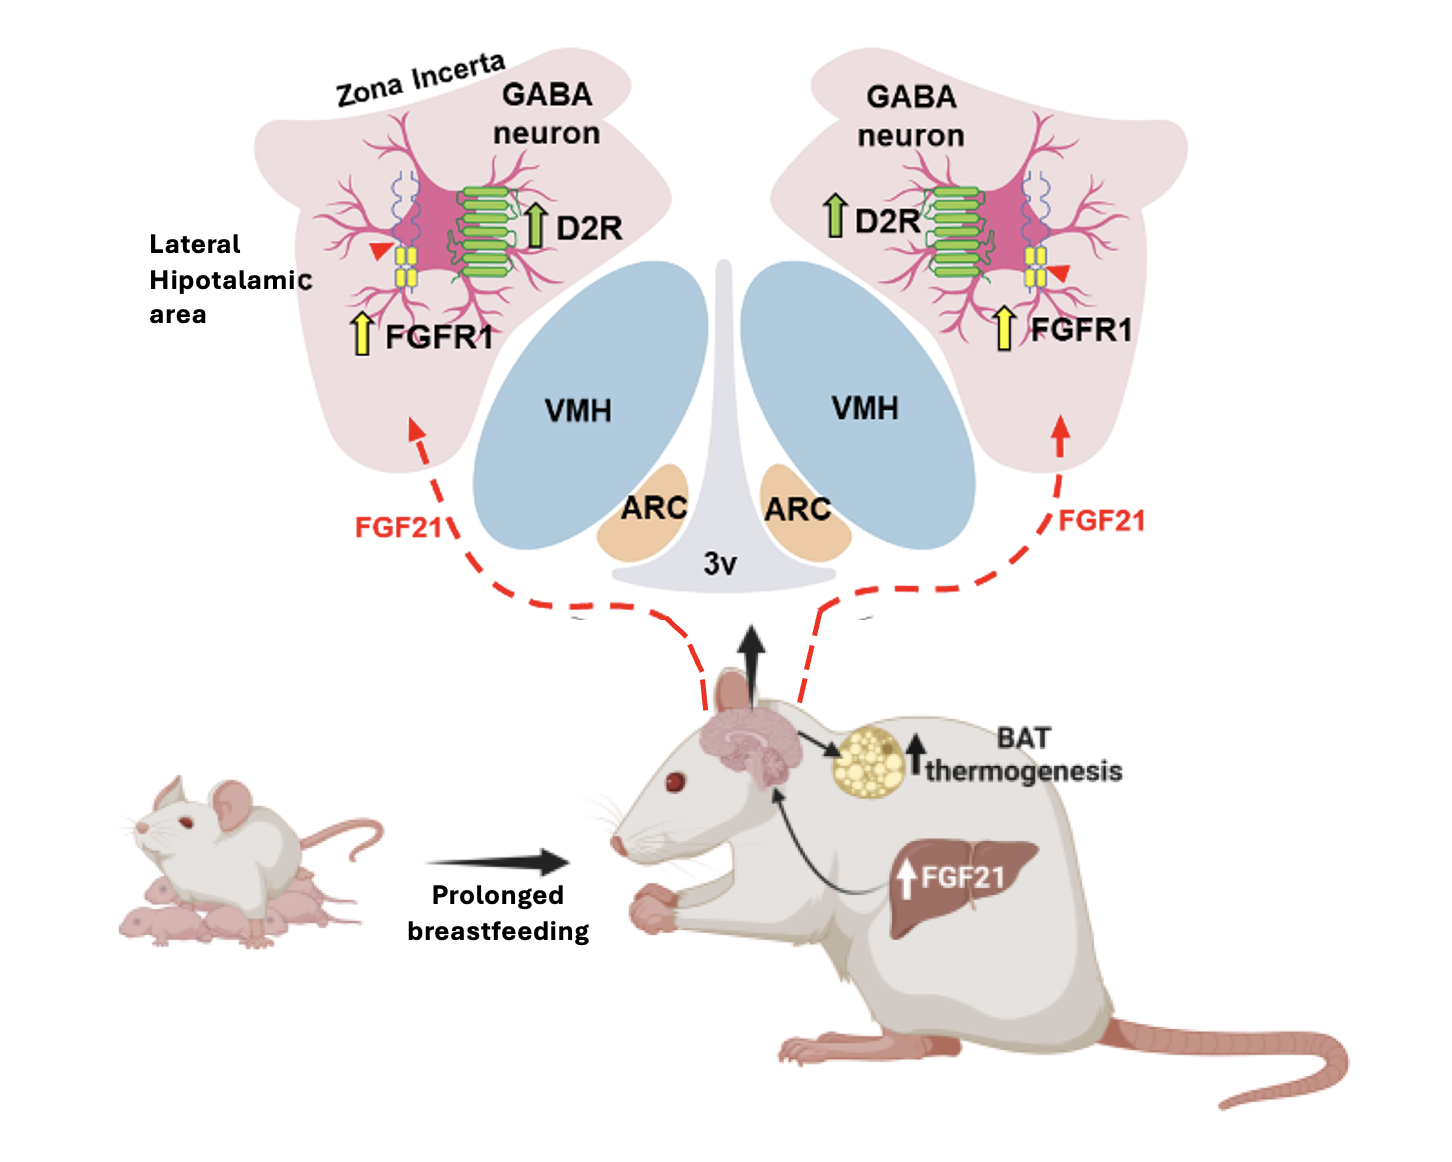 Figure 2. Prolonged lactation increases the synthesis and release of FGF21 in the liver. FGF21 enters the brain with the aid of tanycytic shuttles and acts on neurons of the lateral hypothalamic area/zona incerta, which also express the FGF21 receptor. By acting in these neurons, FGF21 induces thermogenesis in brown adipose tissue, which leads to higher energy expenditure, contributing to the protection against weight gain.